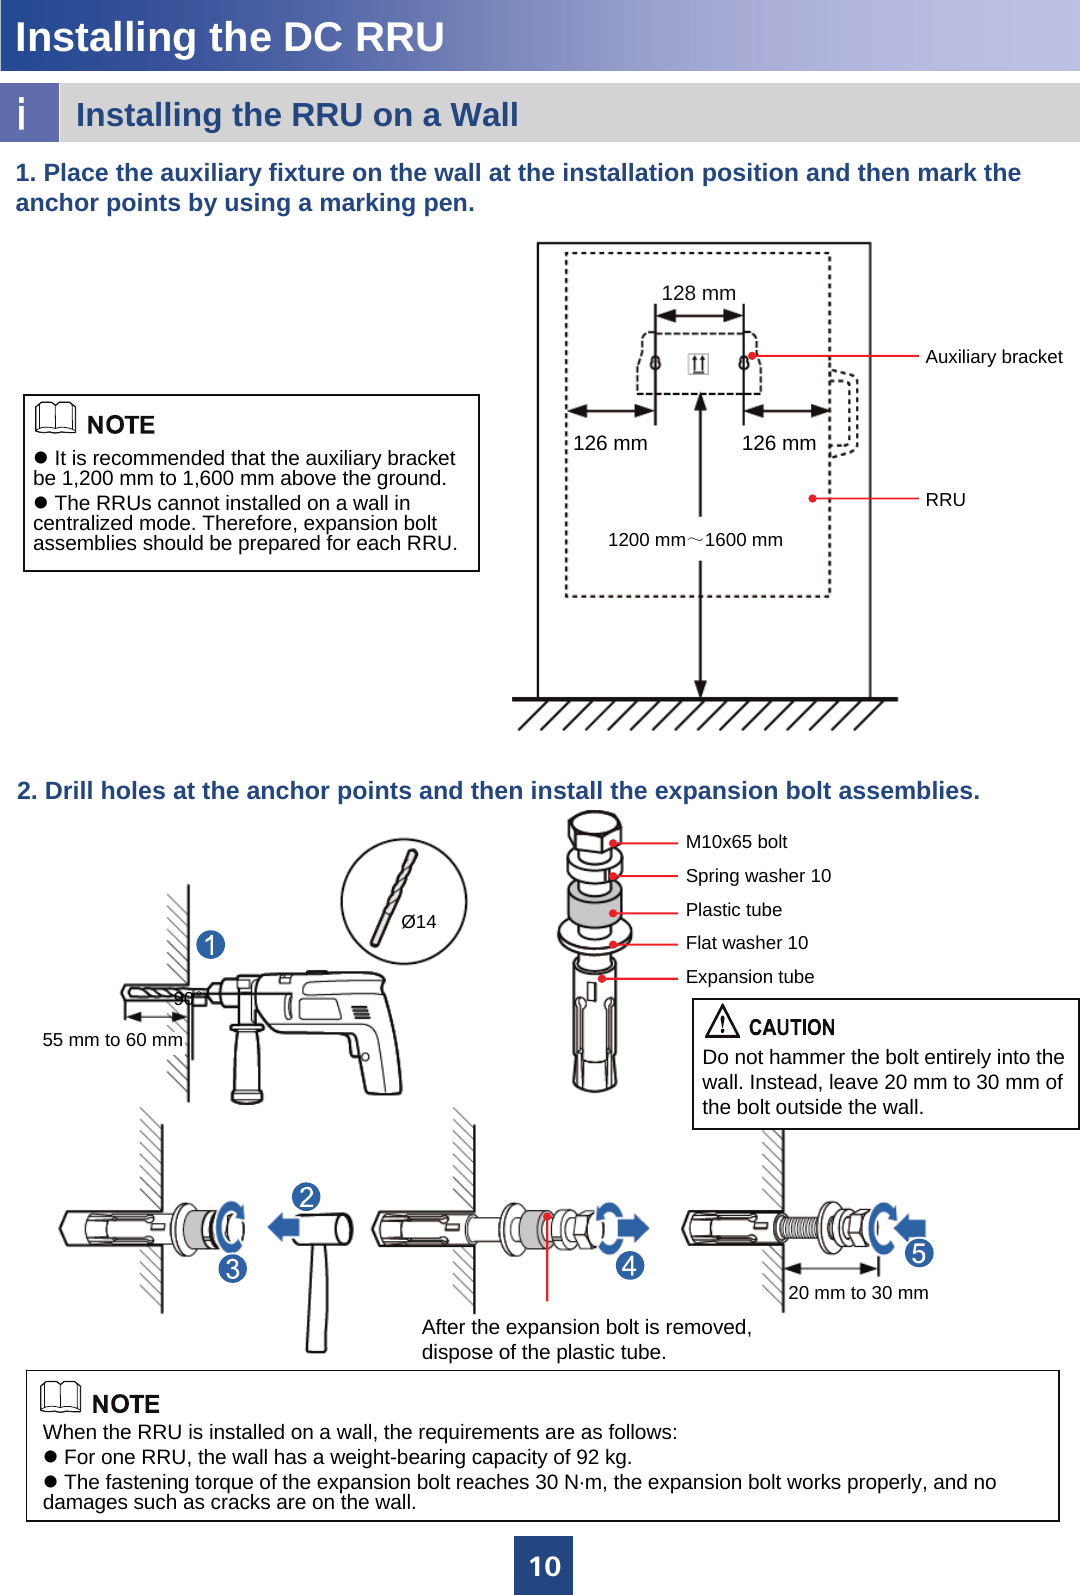 10Ø14After the expansion bolt is removed, dispose of the plastic tube.90°55 mm to 60 mm20 mm to 30 mmM10x65 boltSpring washer 10Plastic tubeFlat washer 10Expansion tubeDo not hammer the bolt entirely into the wall. Instead, leave 20 mm to 30 mm of the bolt outside the wall.iInstalling the RRU on a WallInstalling the DC RRU 2. Drill holes at the anchor points and then install the expansion bolt assemblies.When the RRU is installed on a wall, the requirements are as follows:zFor one RRU, the wall has a weight-bearing capacity of 92 kg.zThe fastening torque of the expansion bolt reaches 30 N·m, the expansion bolt works properly, and no damages such as cracks are on the wall. 1. Place the auxiliary fixture on the wall at the installation position and then mark the anchor points by using a marking pen.zIt is recommended that the auxiliary bracket be 1,200 mm to 1,600 mm above the ground.zThe RRUs cannot installed on a wall in centralized mode. Therefore, expansion bolt assemblies should be prepared for each RRU. 1200 mm～1600 mm128 mm126 mmAuxiliary bracket126 mmRRU